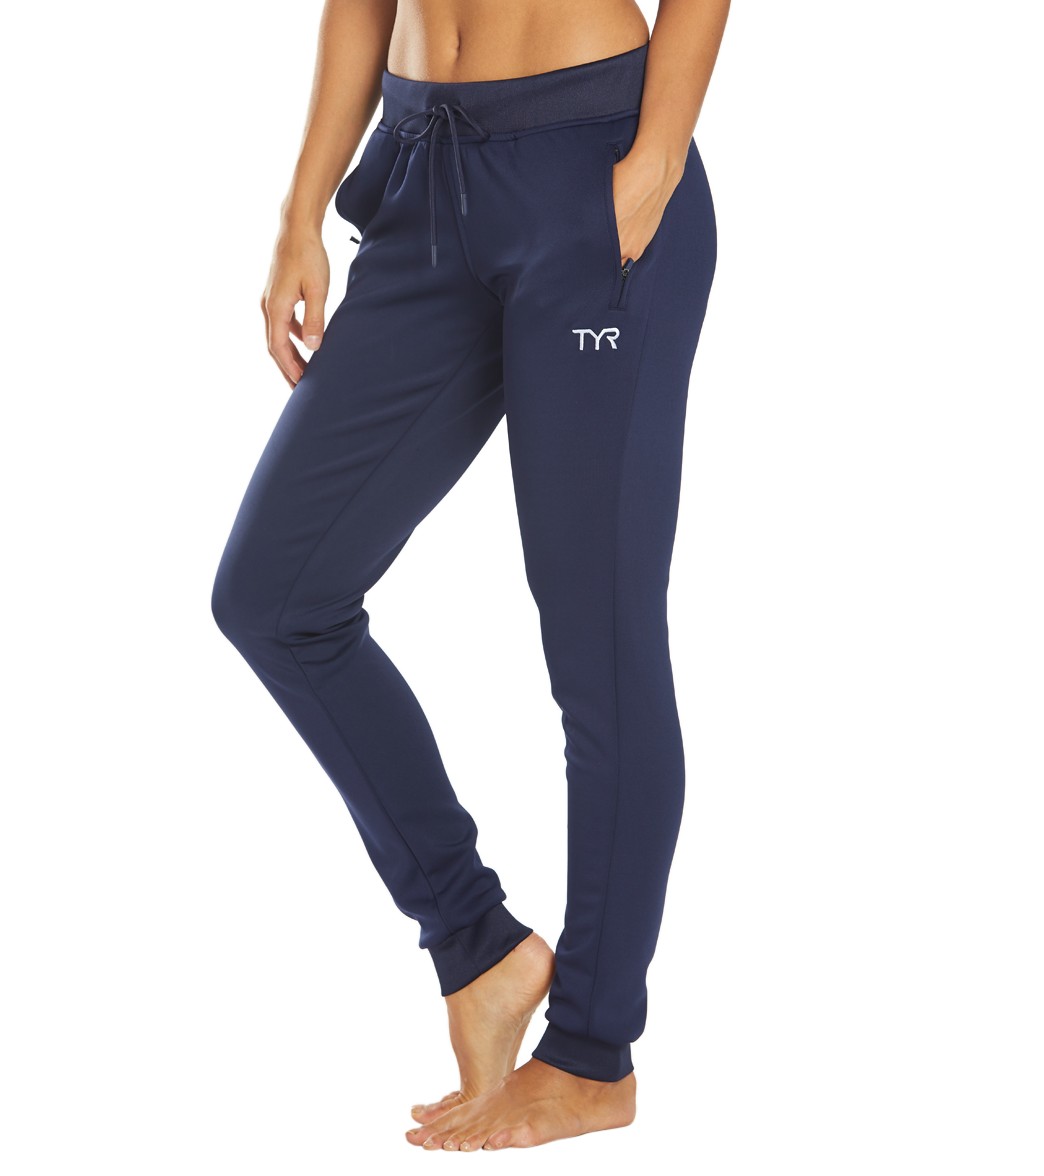 TYR Women's Team Jogger Pant at SwimOutlet.com